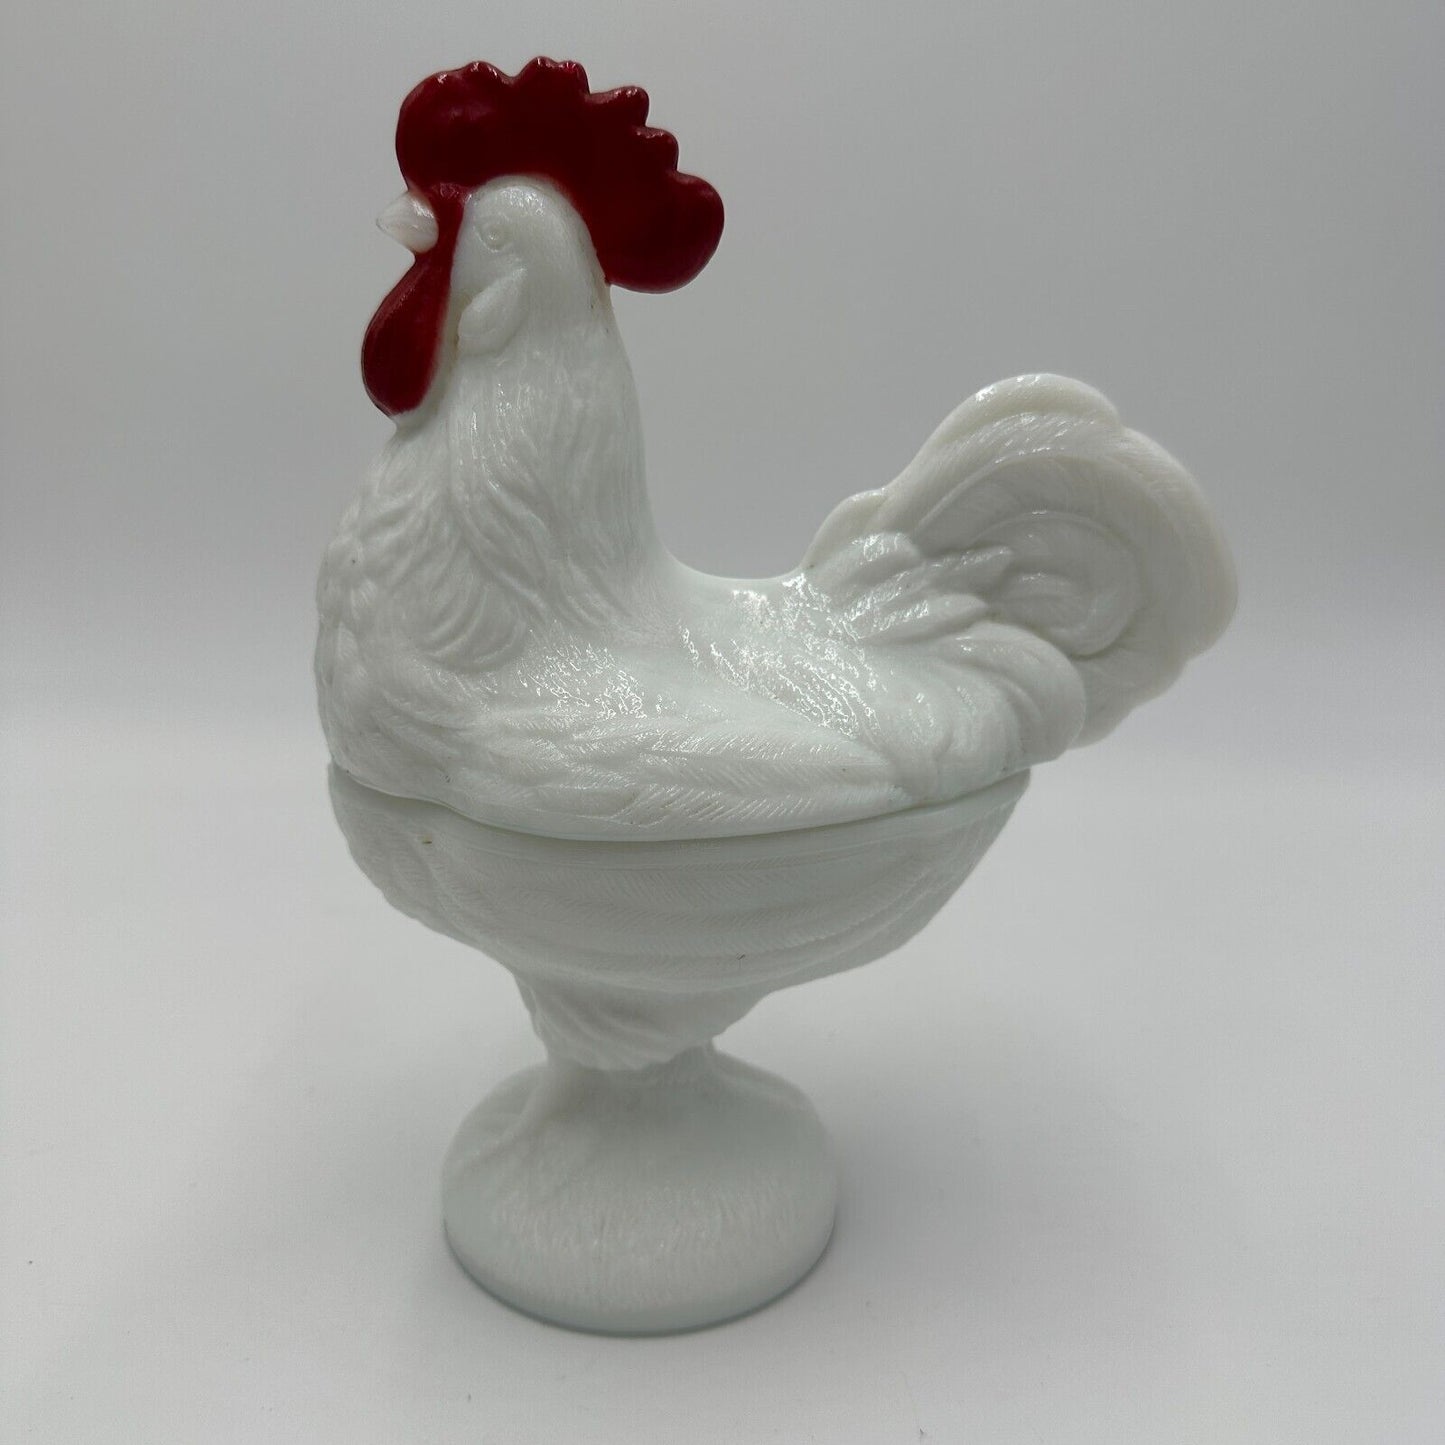 Westmoreland Rooster Milk Glass 2 Pieces Lid Candy Dish Home Decor Large